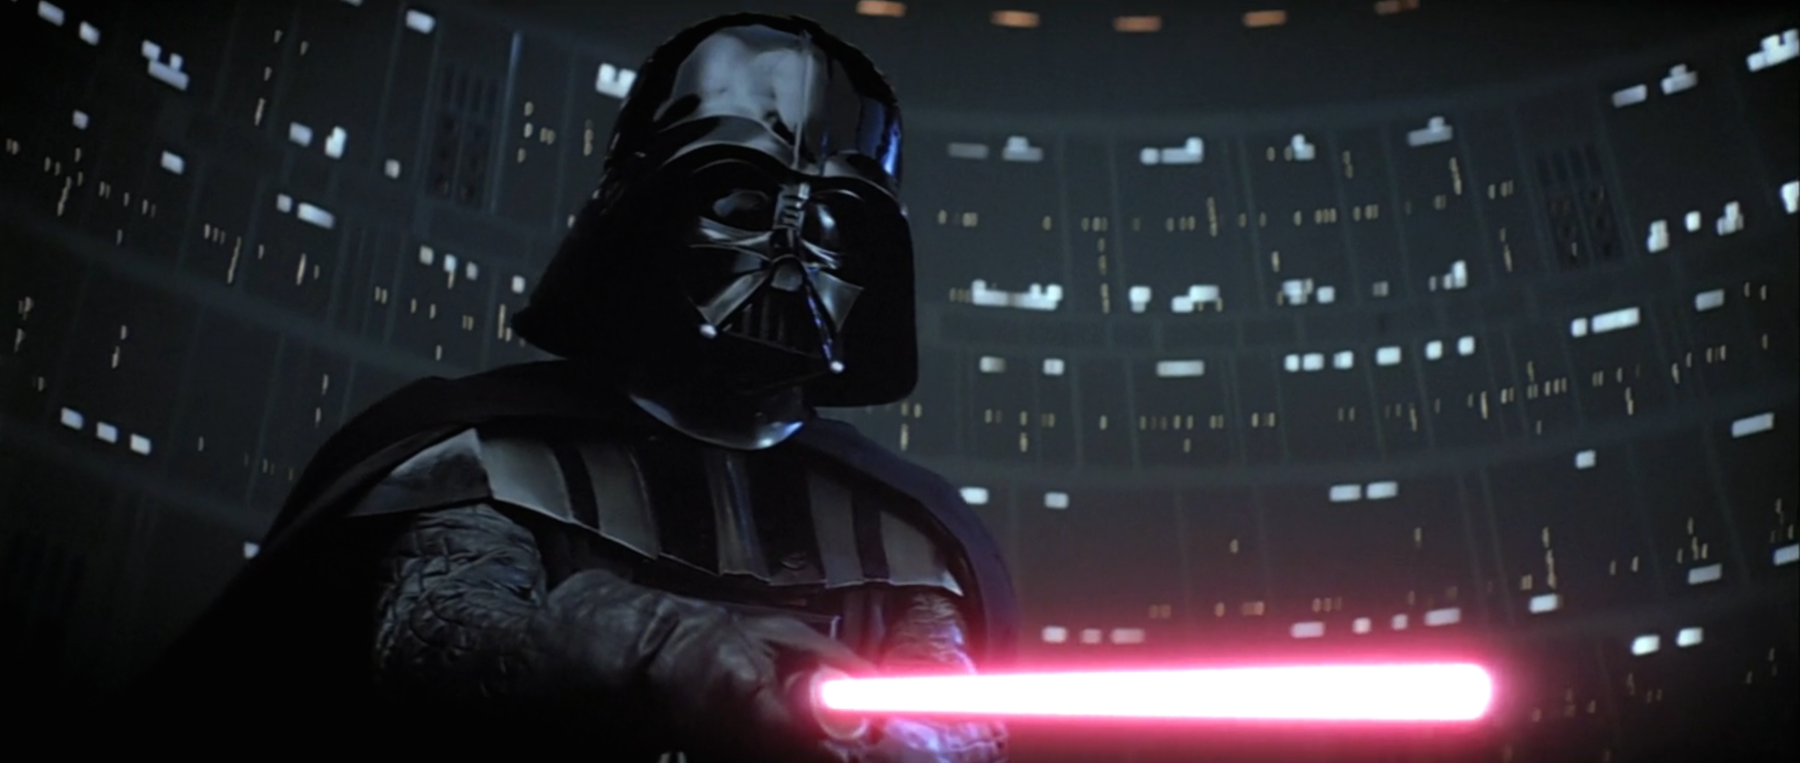 Darth Vader points his red lightsaber at Luke Skywalker during their fight in Cloud City in The Empire Strikes Back